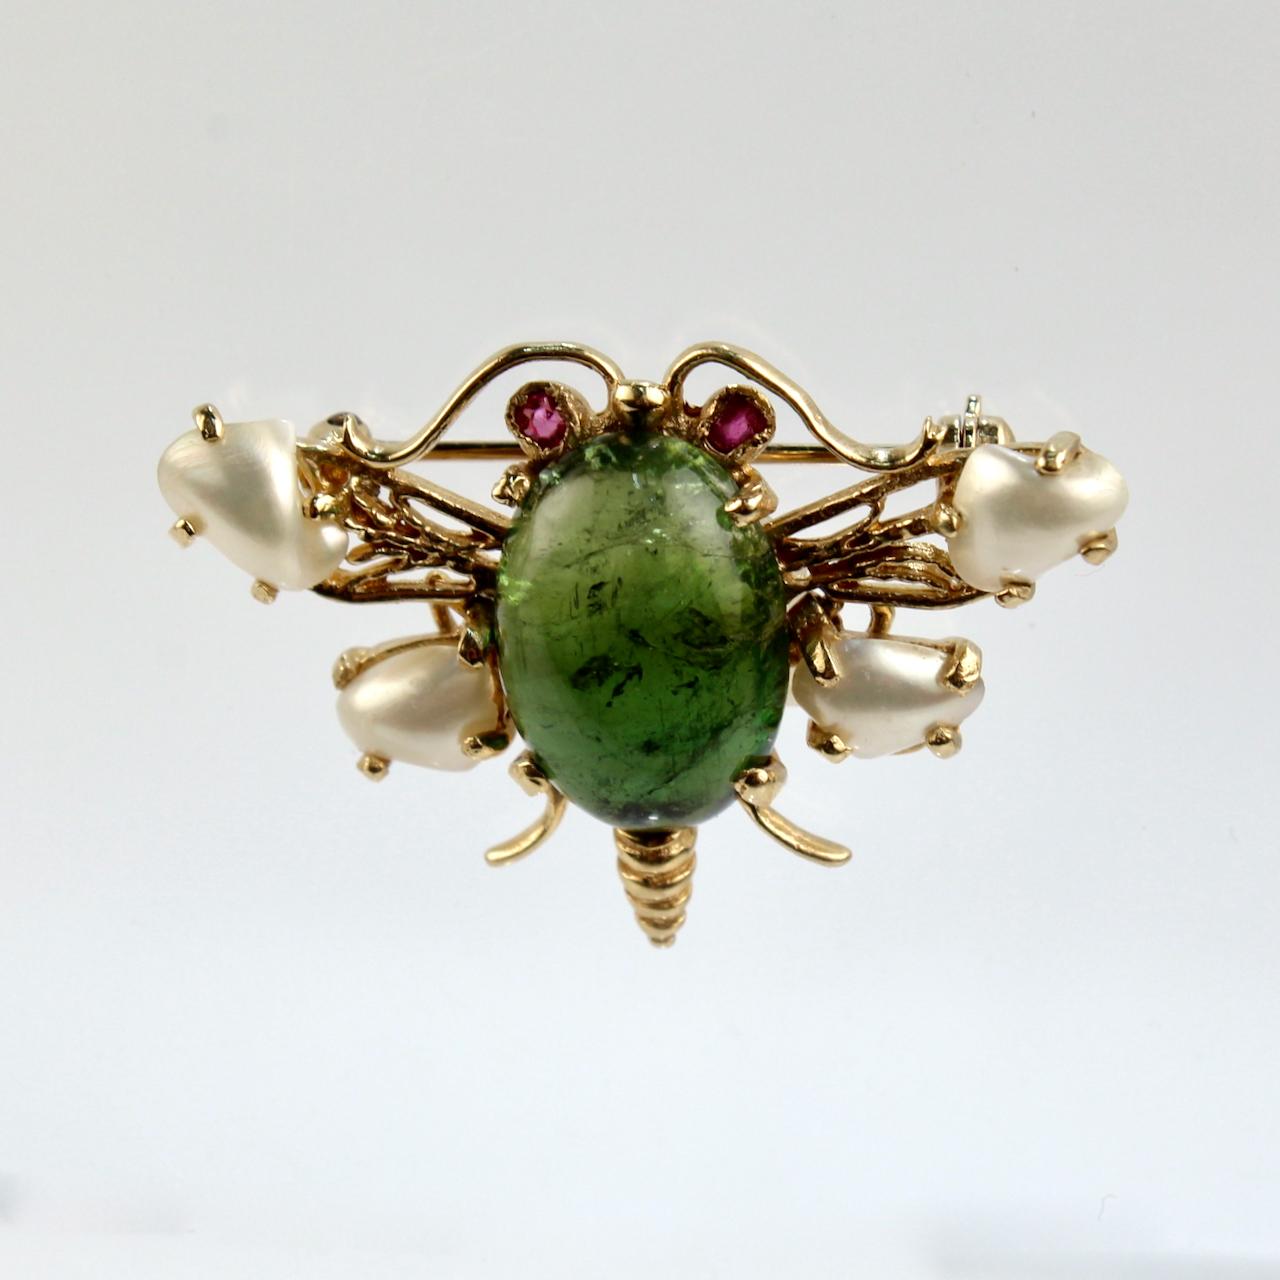 Modern 14 Karat Gold and Green Tourmaline Kinetic Bee Brooch with Pearls and Rubies For Sale